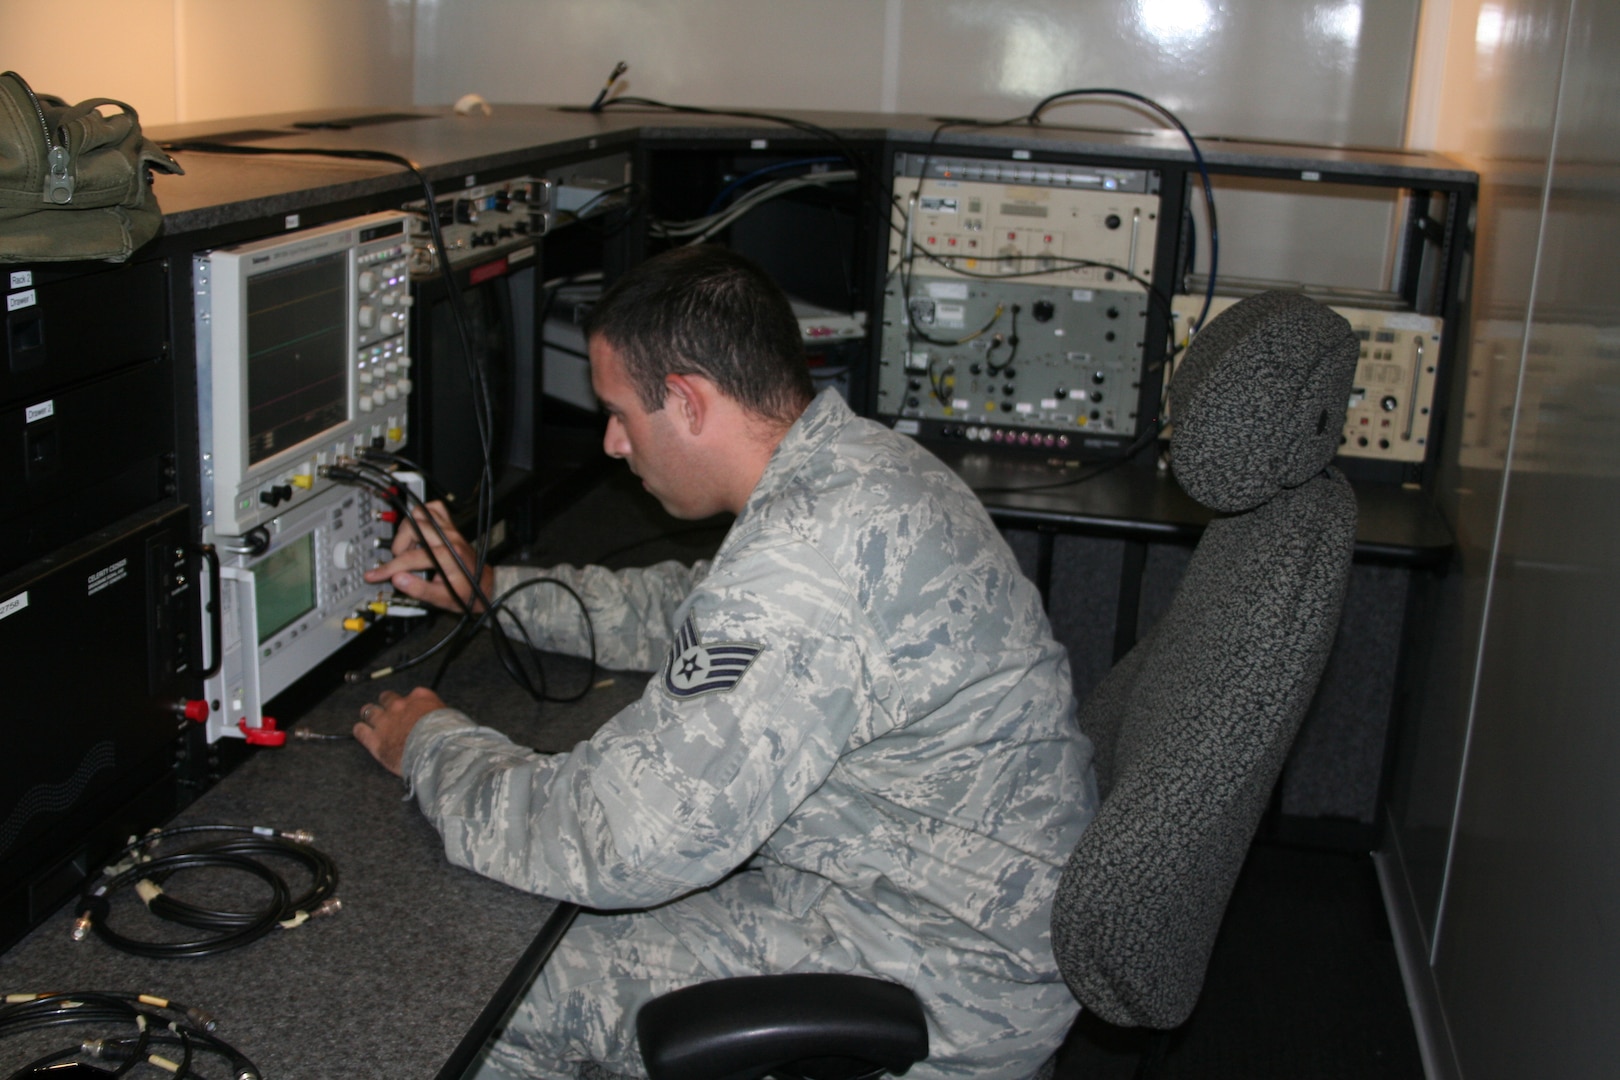 Staff Sgt. Phillip Graves, 346th Test Squadron, calibrates equipment for radio frequency emission testing here Oct. 4. (U.S. Air Force photo by Senior Airman James Barker)